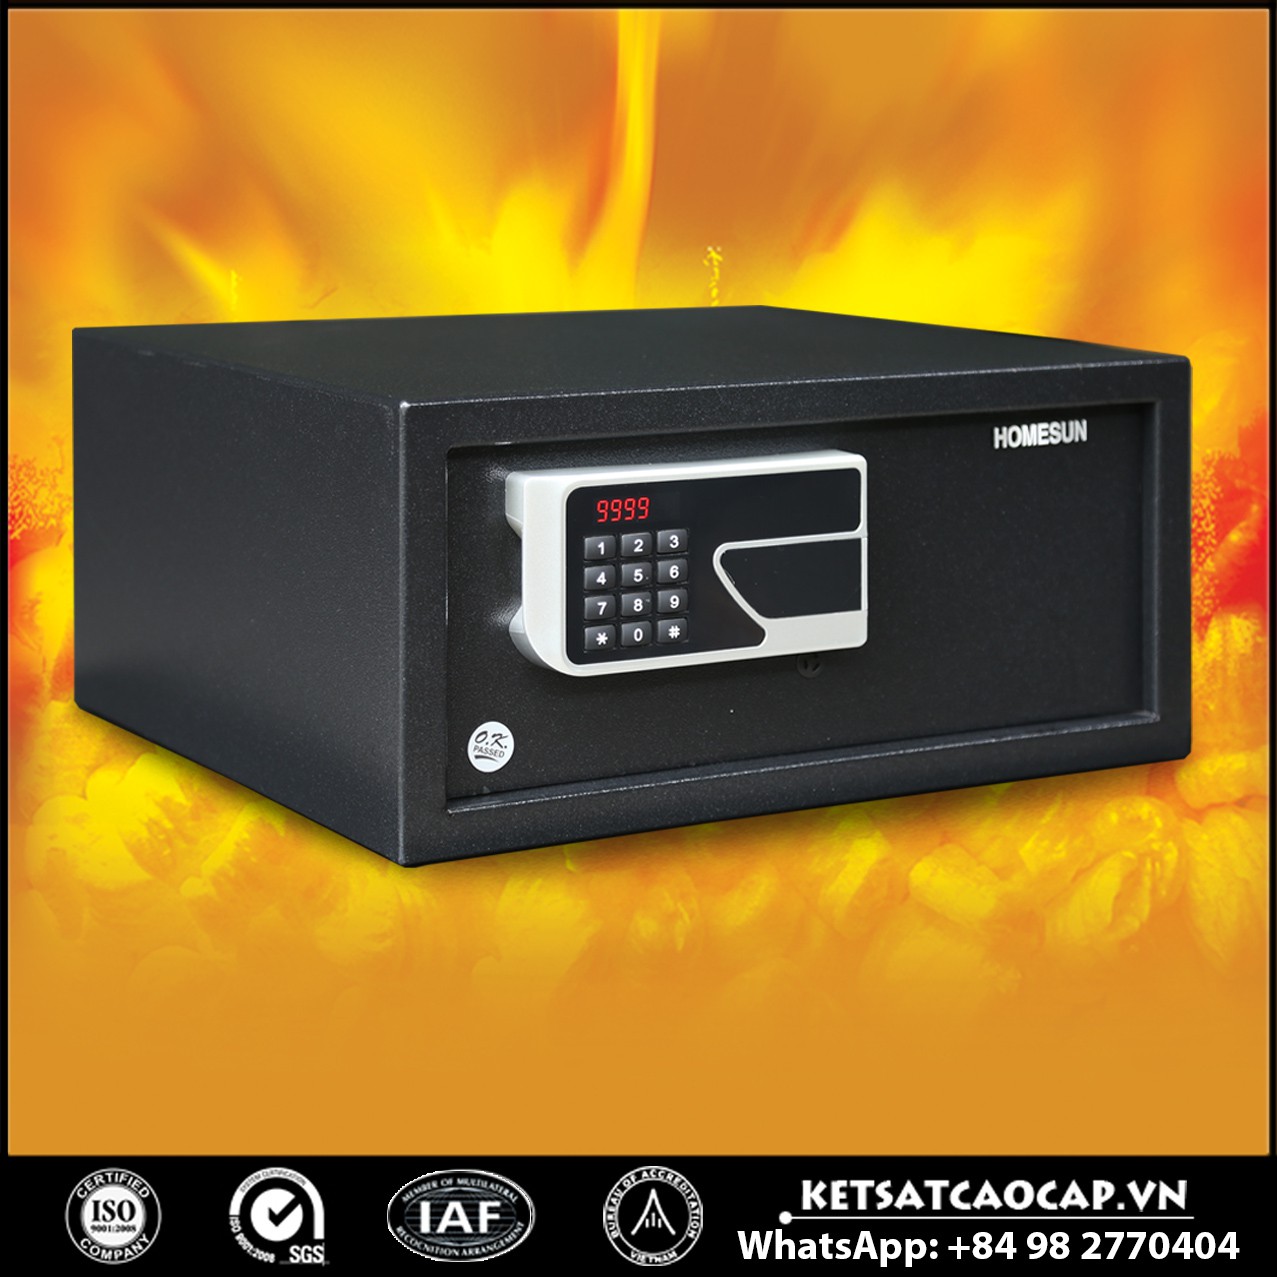 Best Hotel Safe For Home Manufacturers for Sale